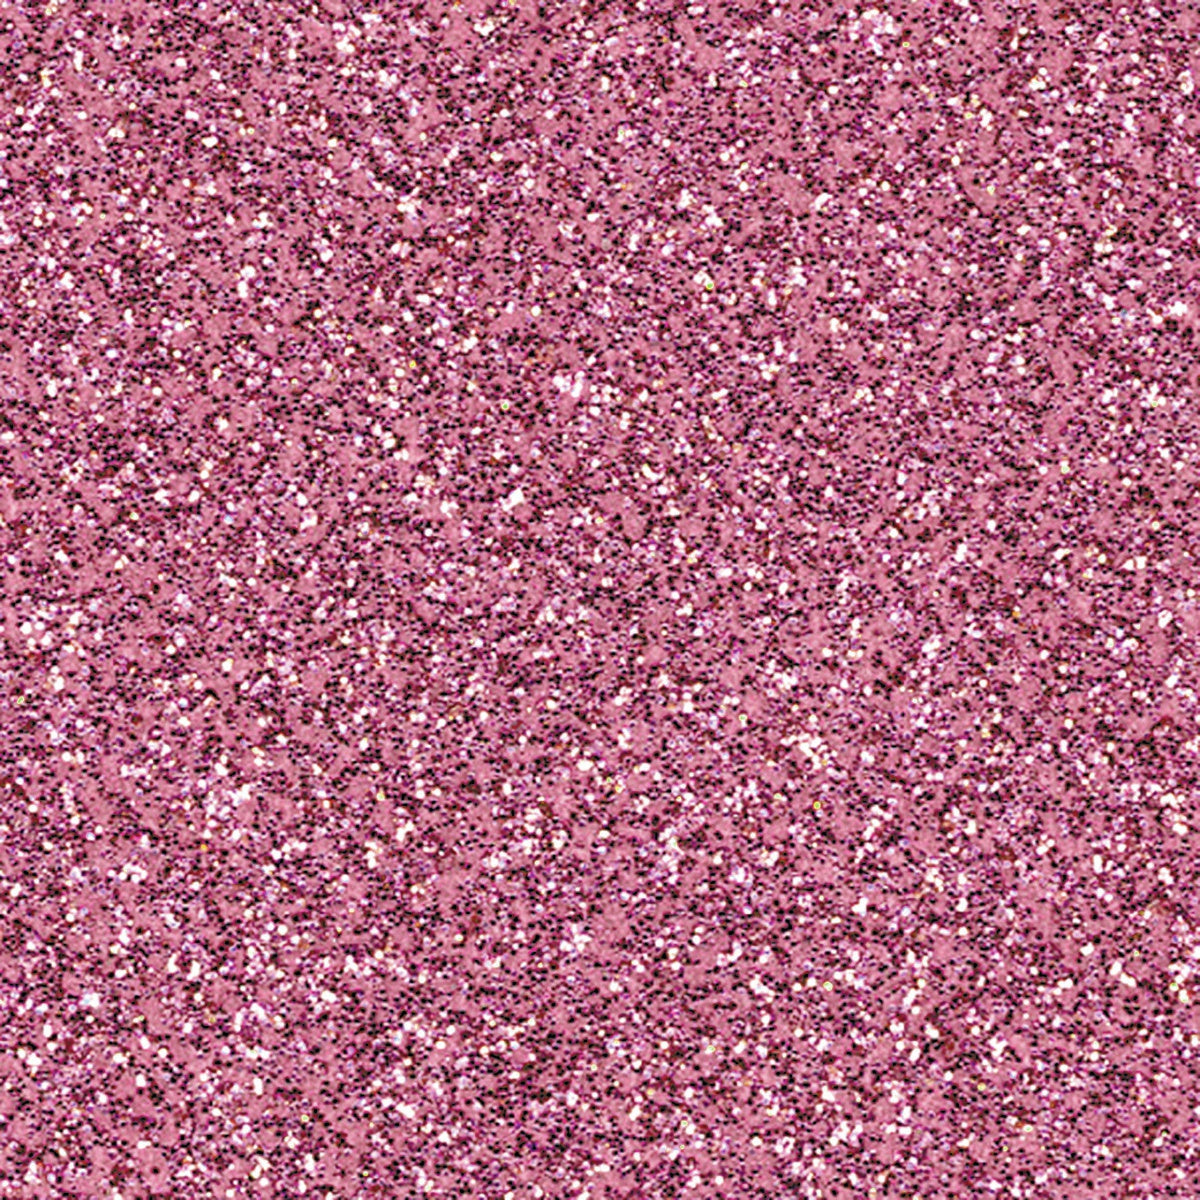 Glitter Pinks Cardstock Paper Pad by Recollections™, 12 x 12